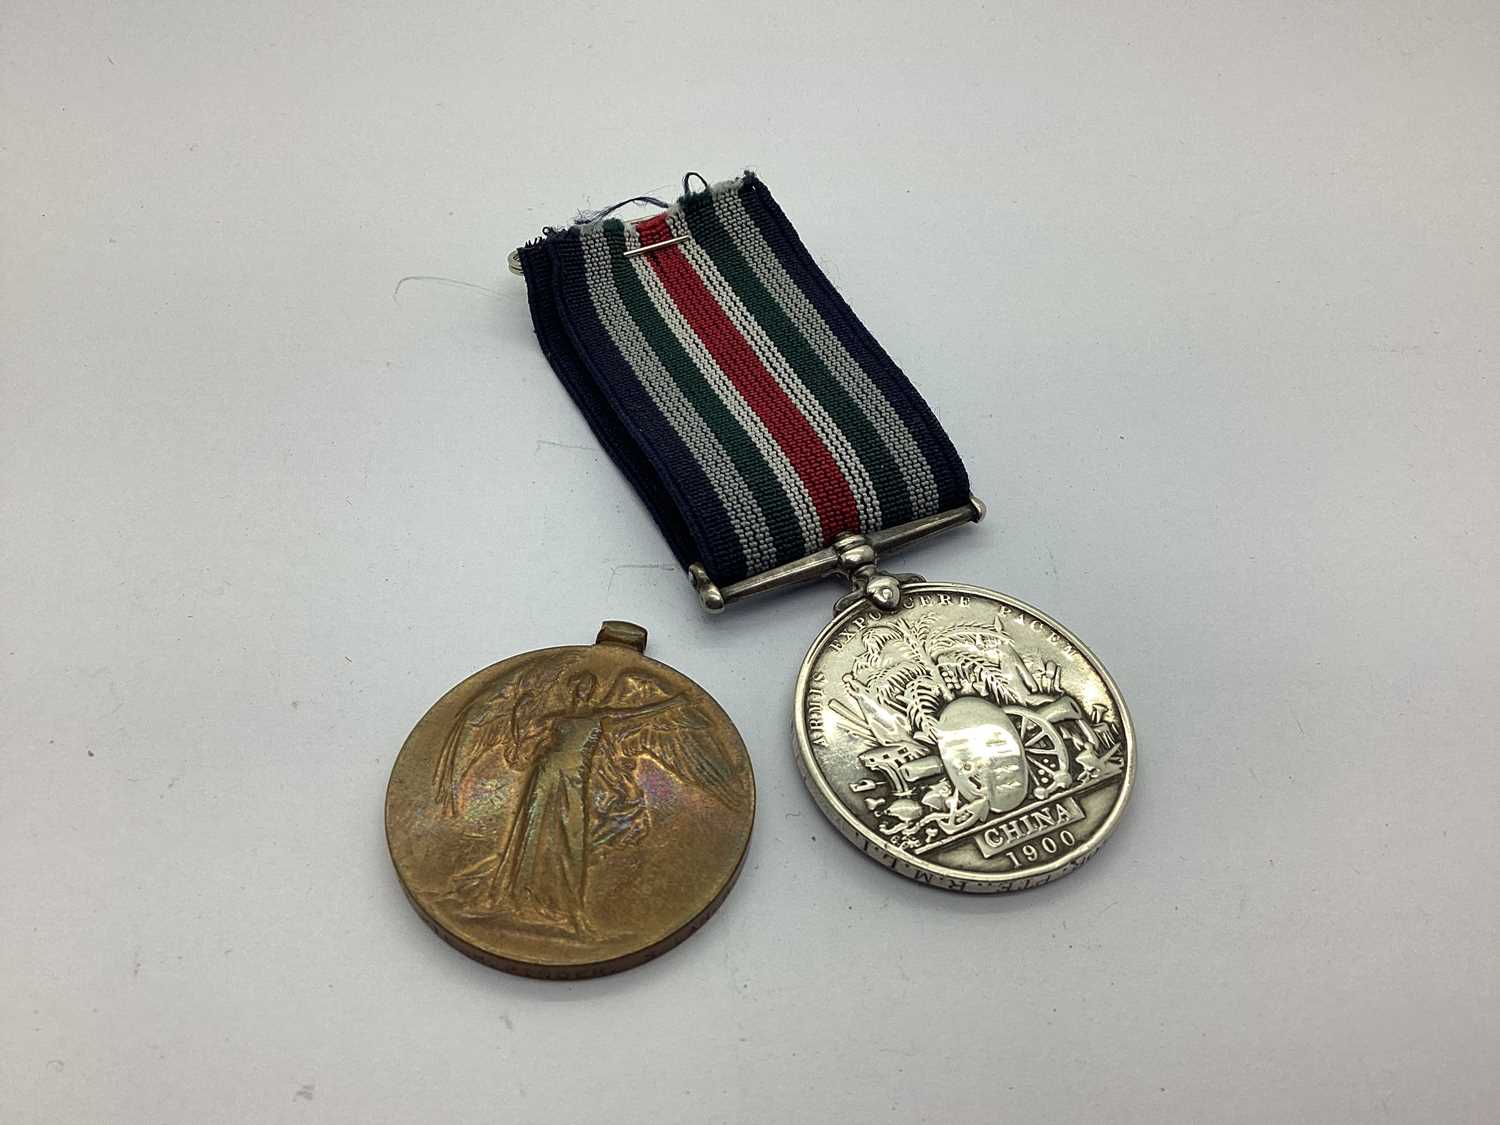 Boxer Rebellion China War Medal 1900 (incorrect ribbon), awarded to F. Proctor PTE RMLI plus WWI